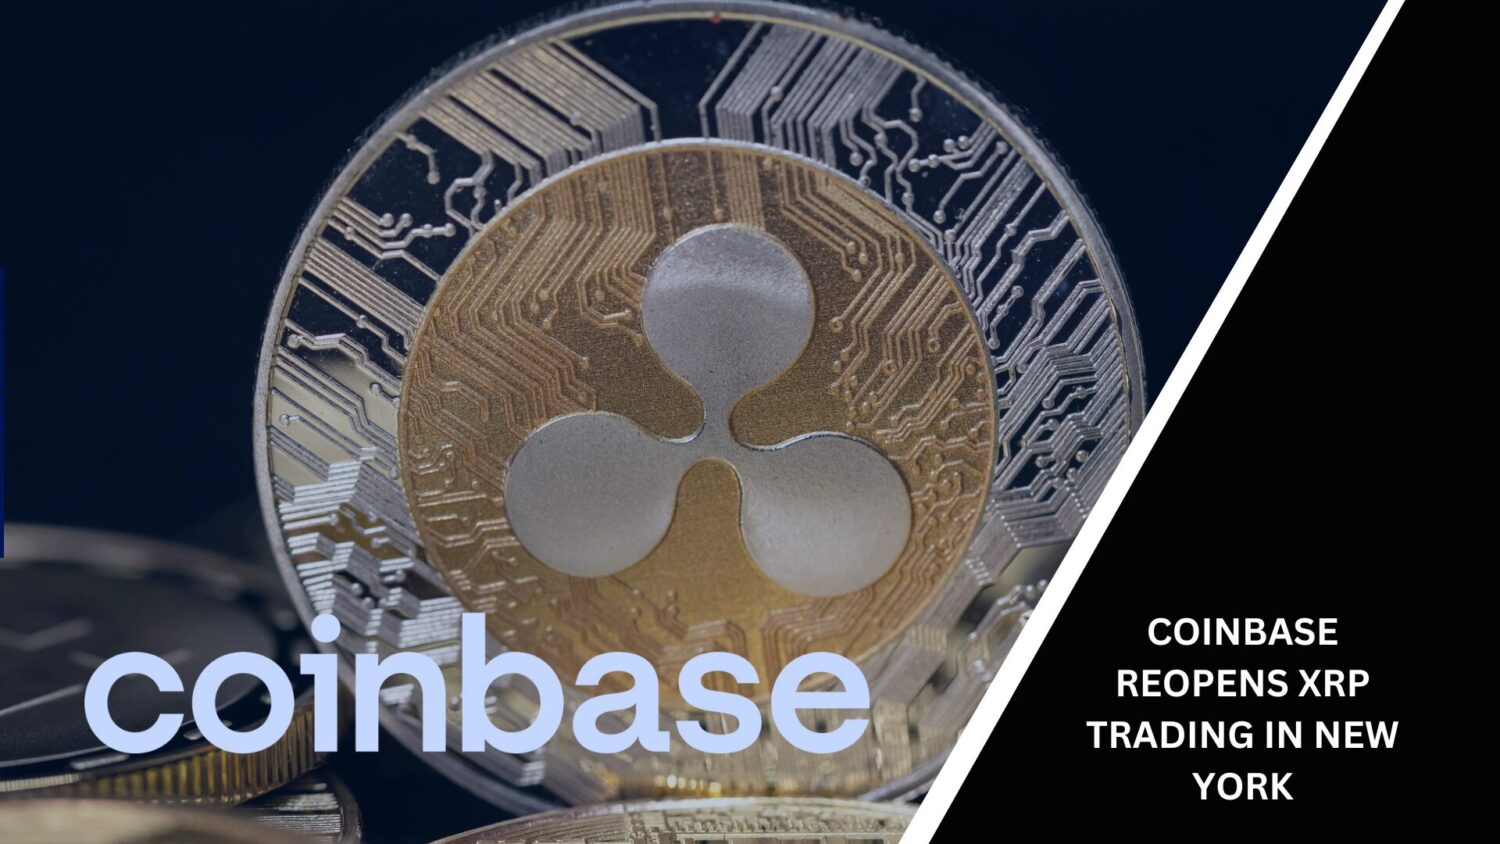 Coinbase Reopens Xrp Trading In New York